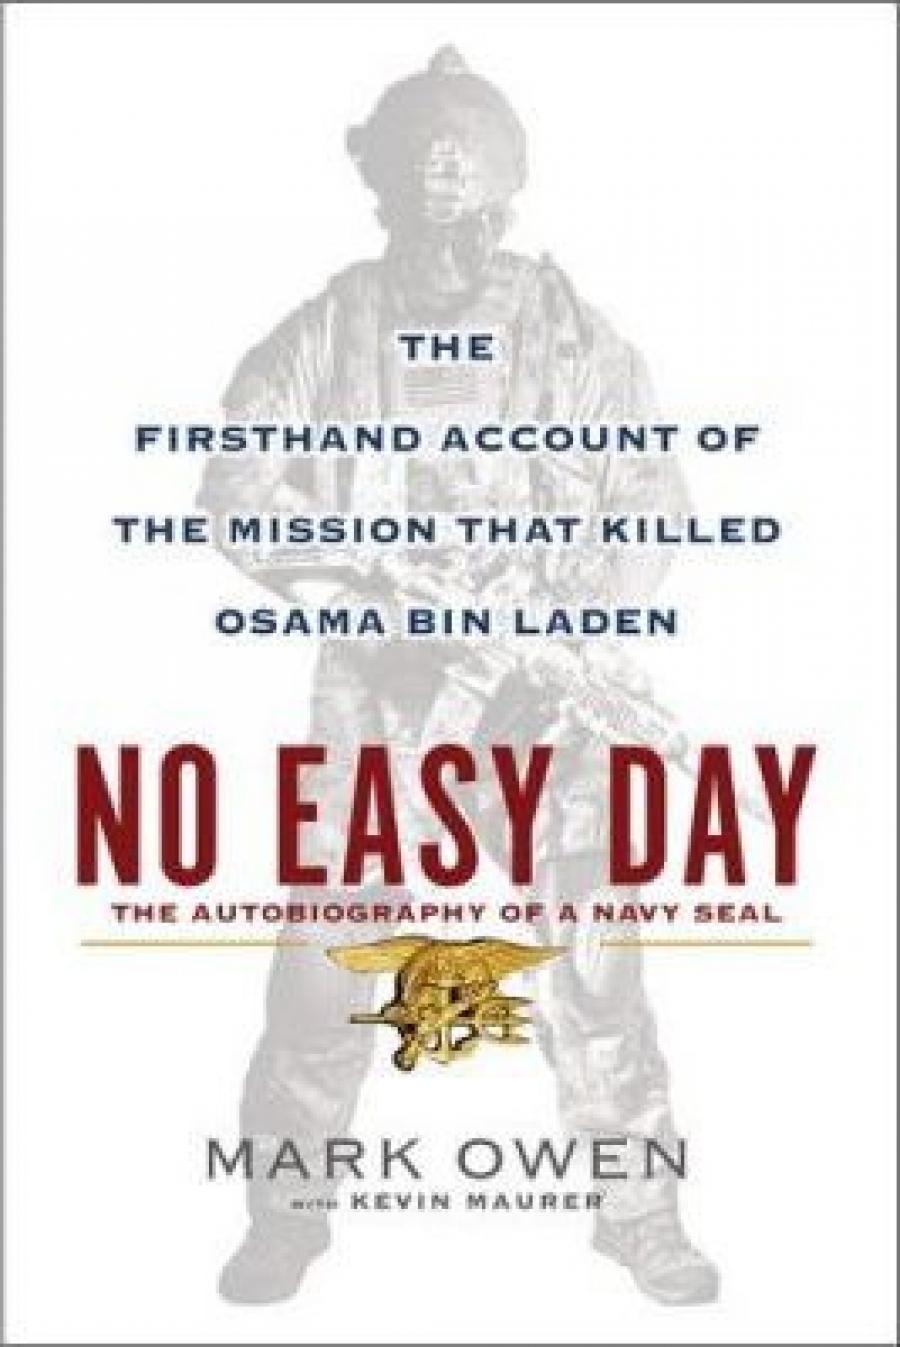 Owen,Mark, Maurer,Kevin No Easy Day: The Firsthand Account of the Mission That Killed Osama Bin Laden 